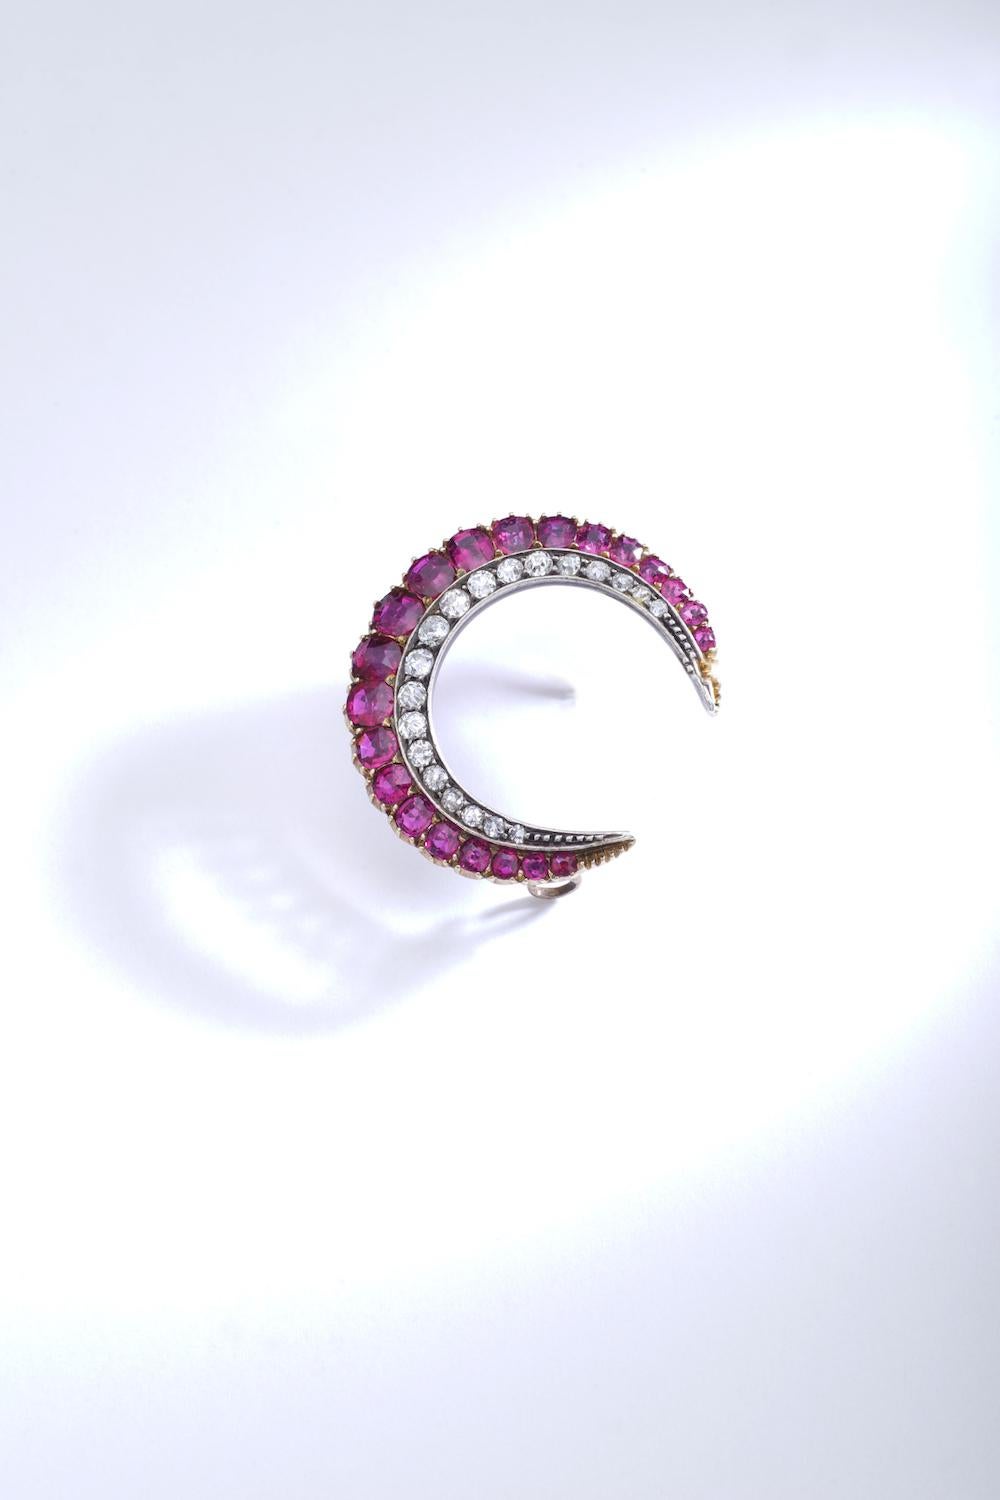 Crescent Ruby Diamond Brooch. 
Silver and pink gold.
Crescent brooch, set with cushion-shaped and round rubies.
Circa 1890.

Diameter approximately 1.18 inch.